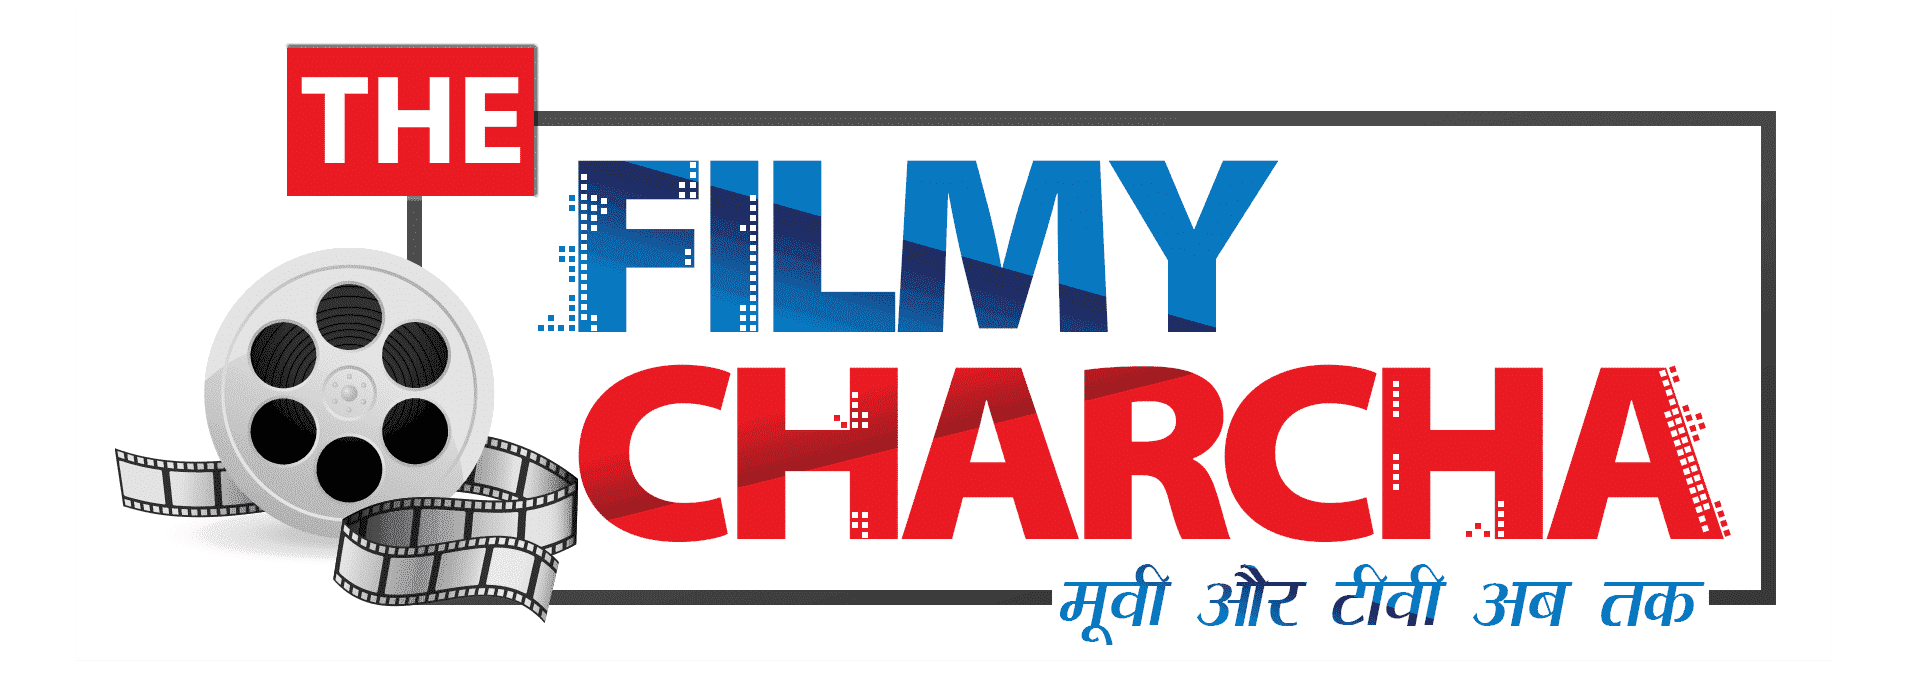 THE FILMY CHARCHA